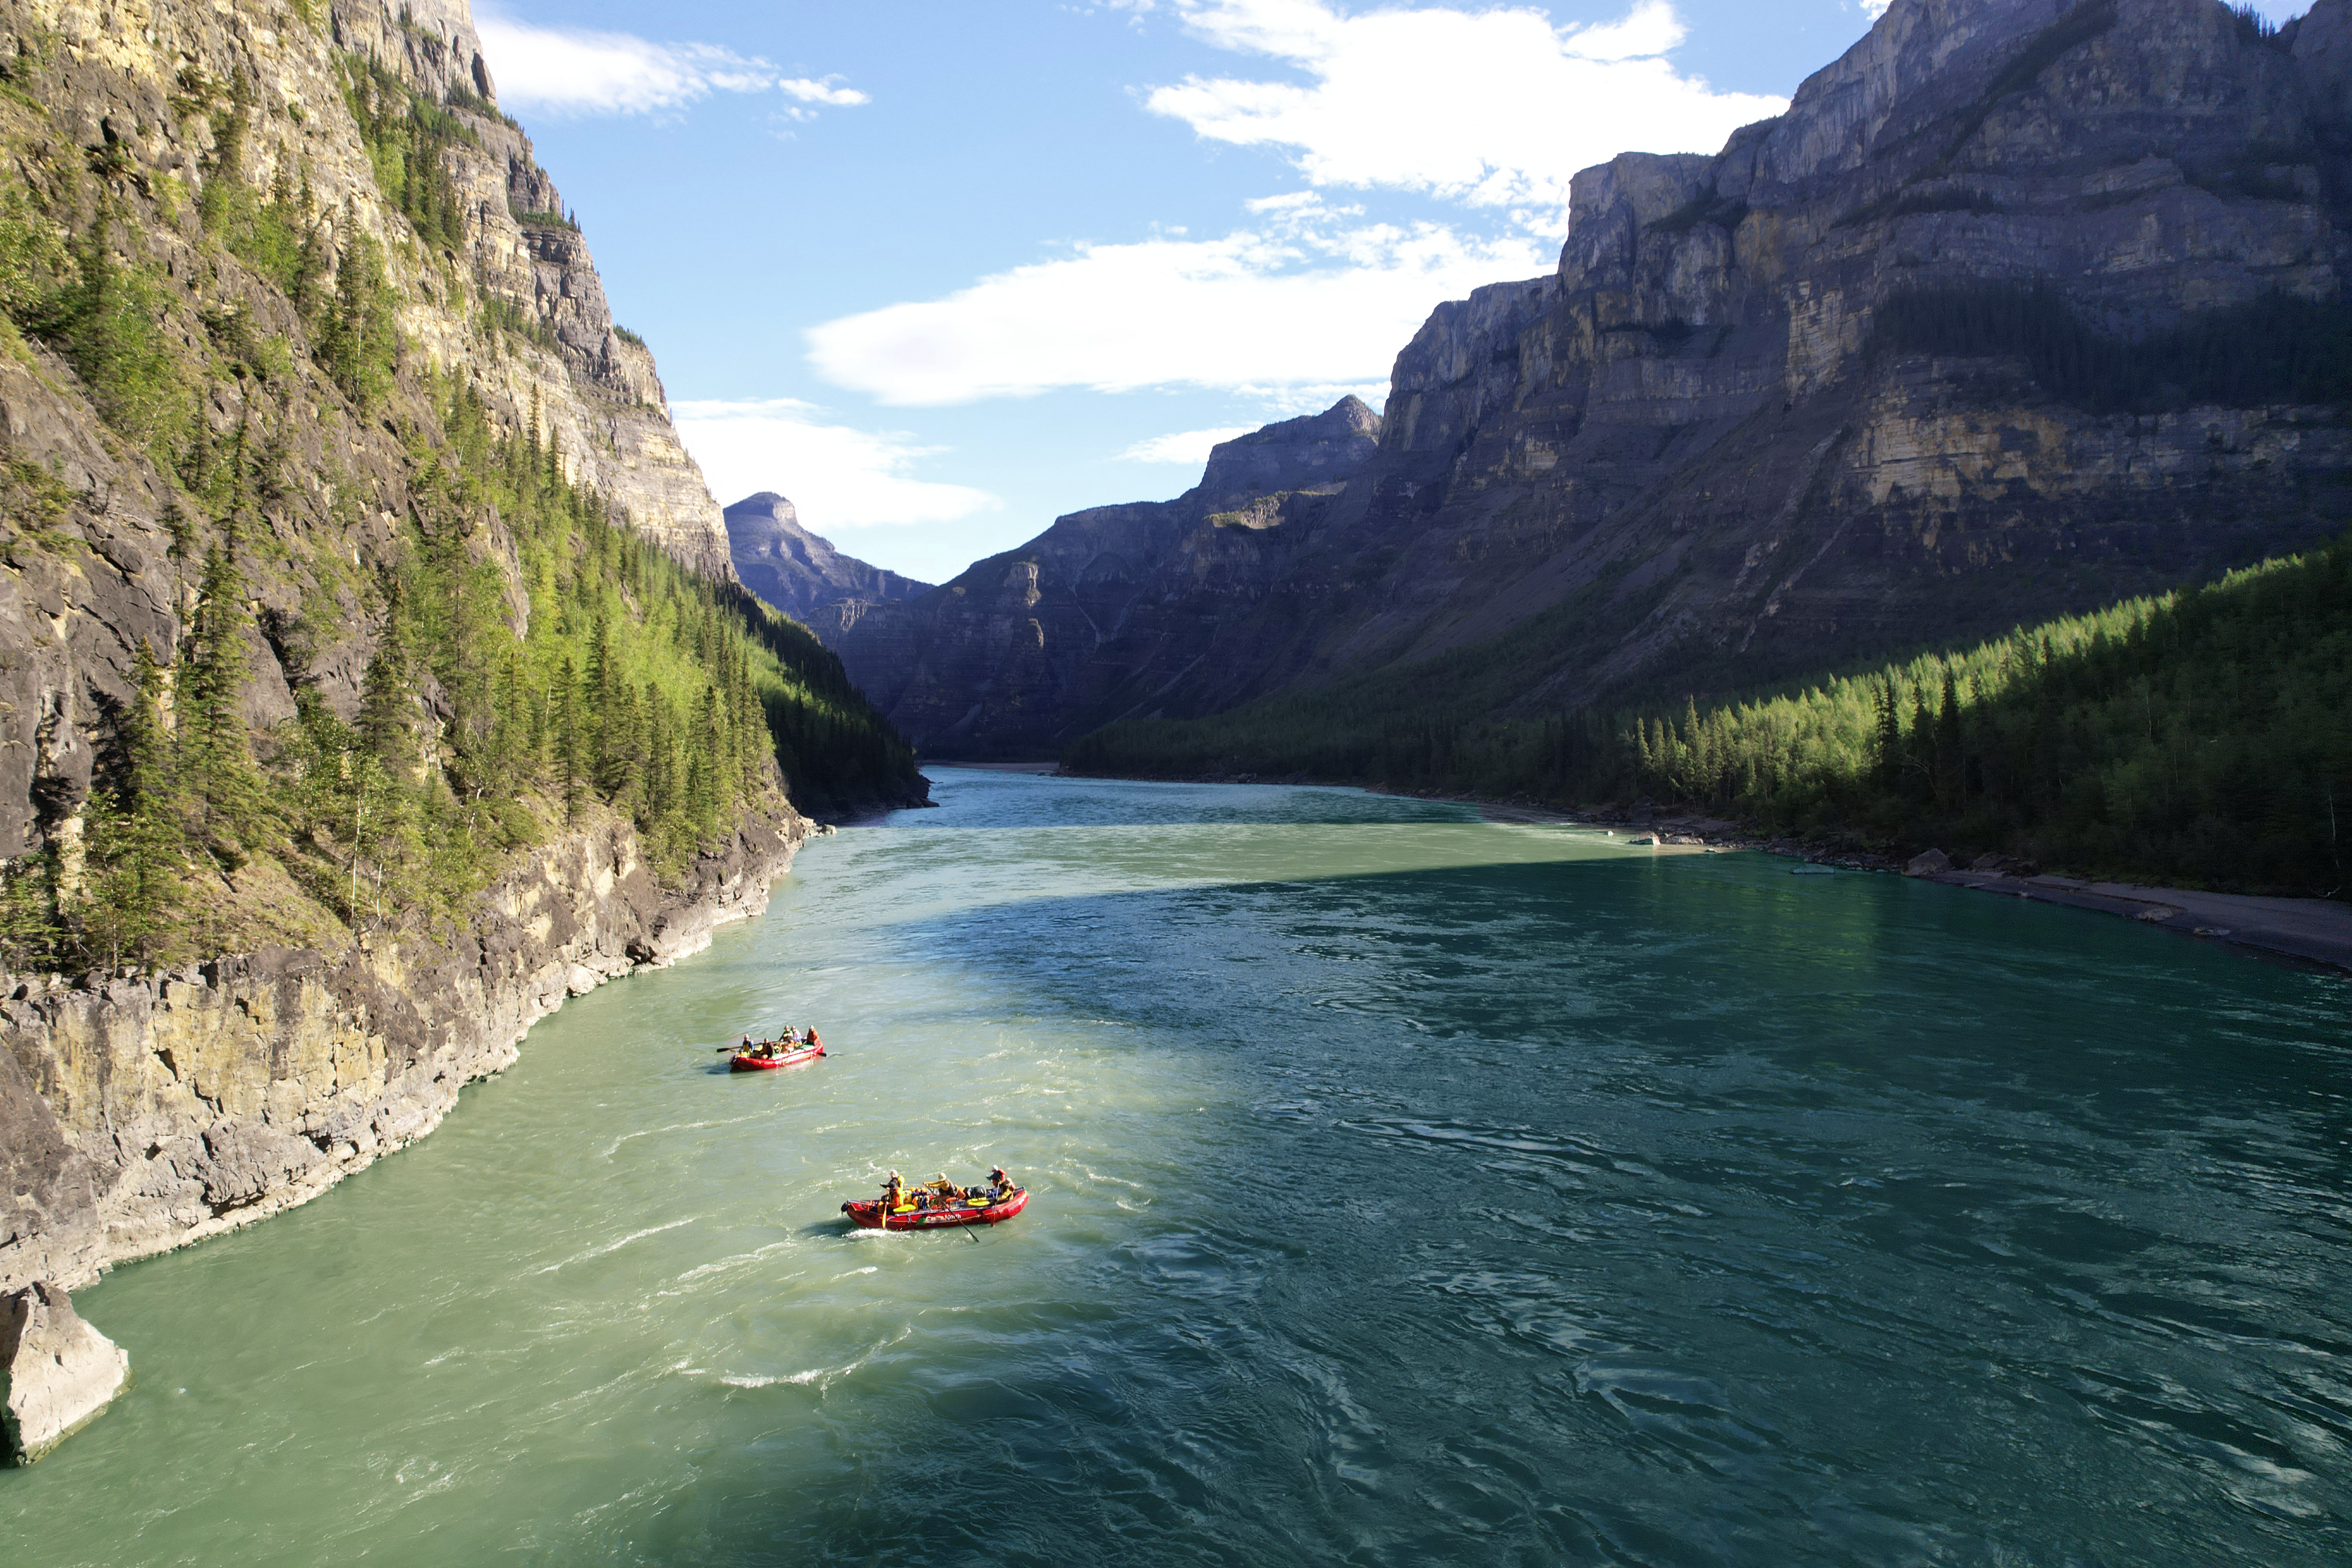 Lafferty's Riffle and 1st Canyon of the Nahanni With rafts